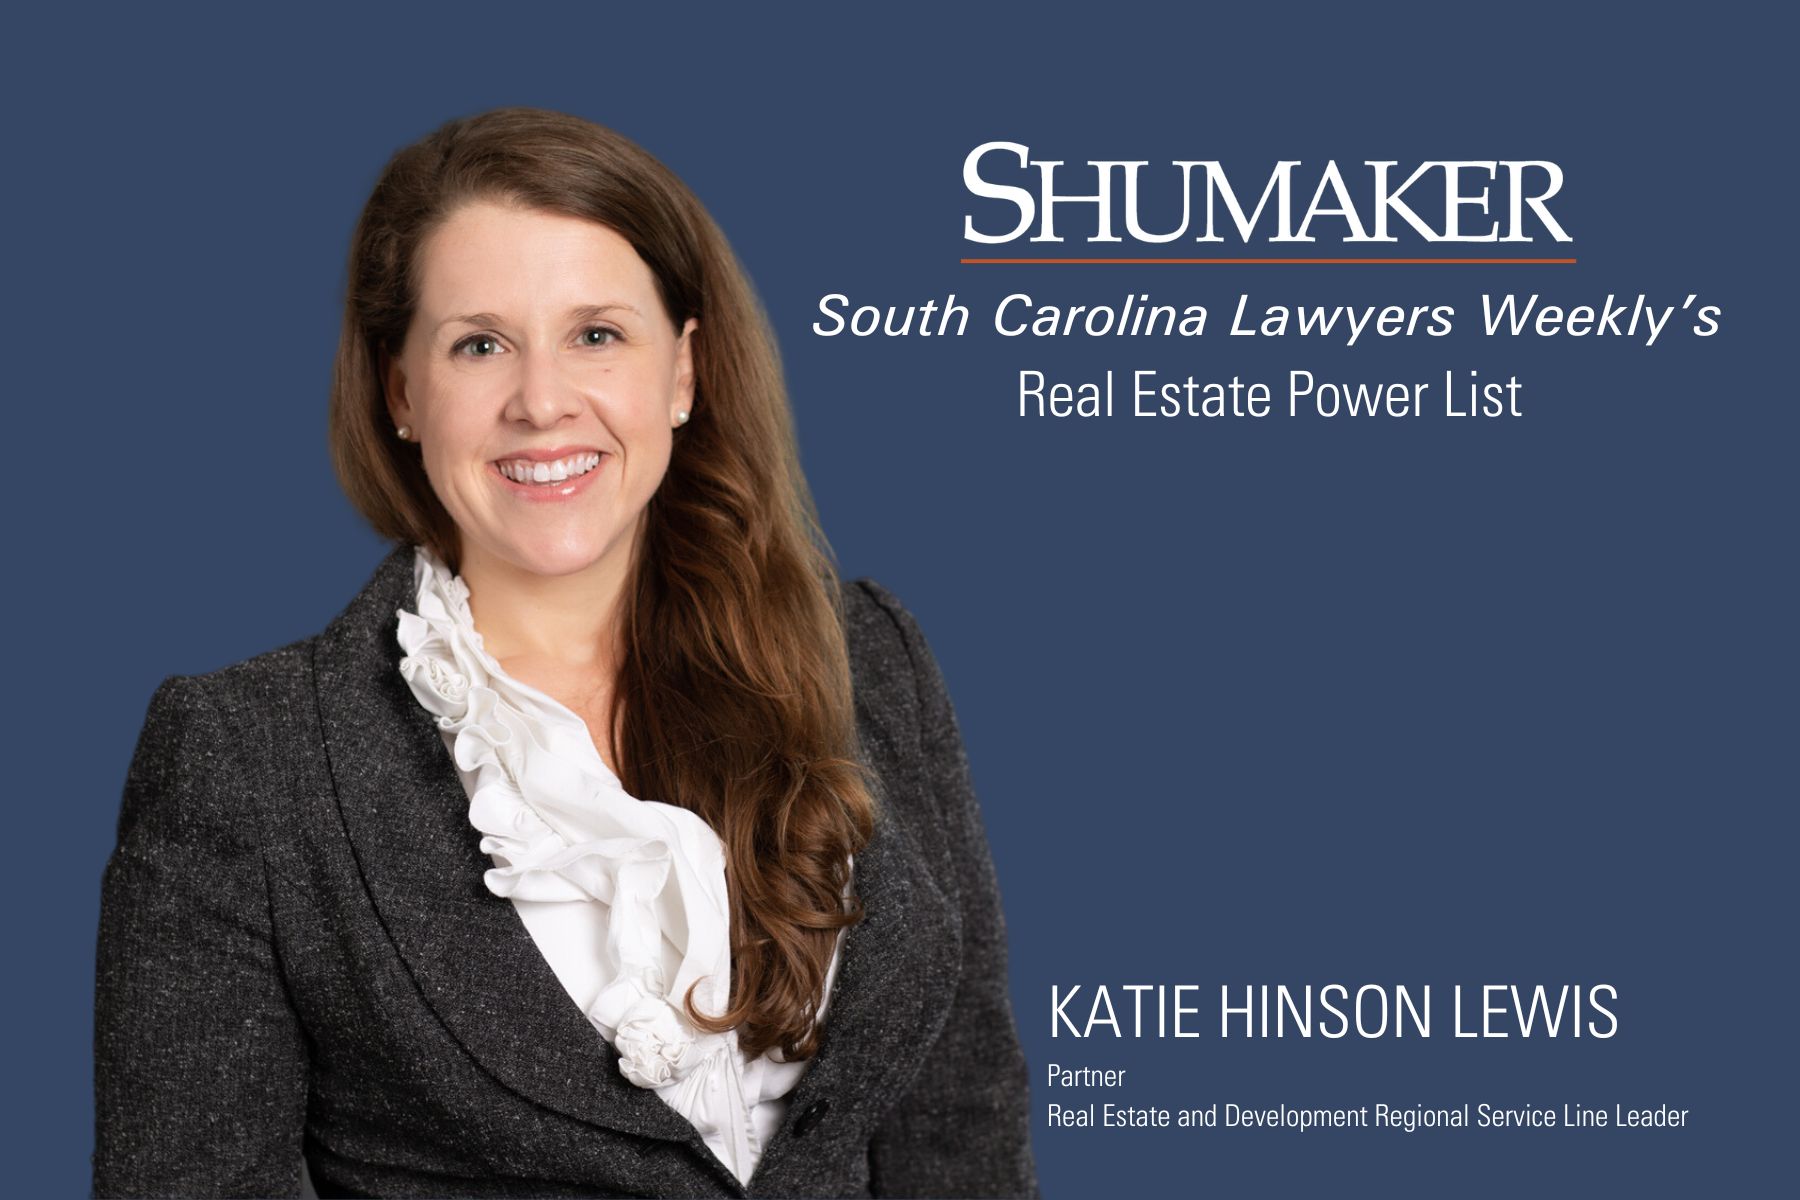 Katie Hinson Lewis Named to South Carolina Lawyers Weekly’s Real Estate Power List